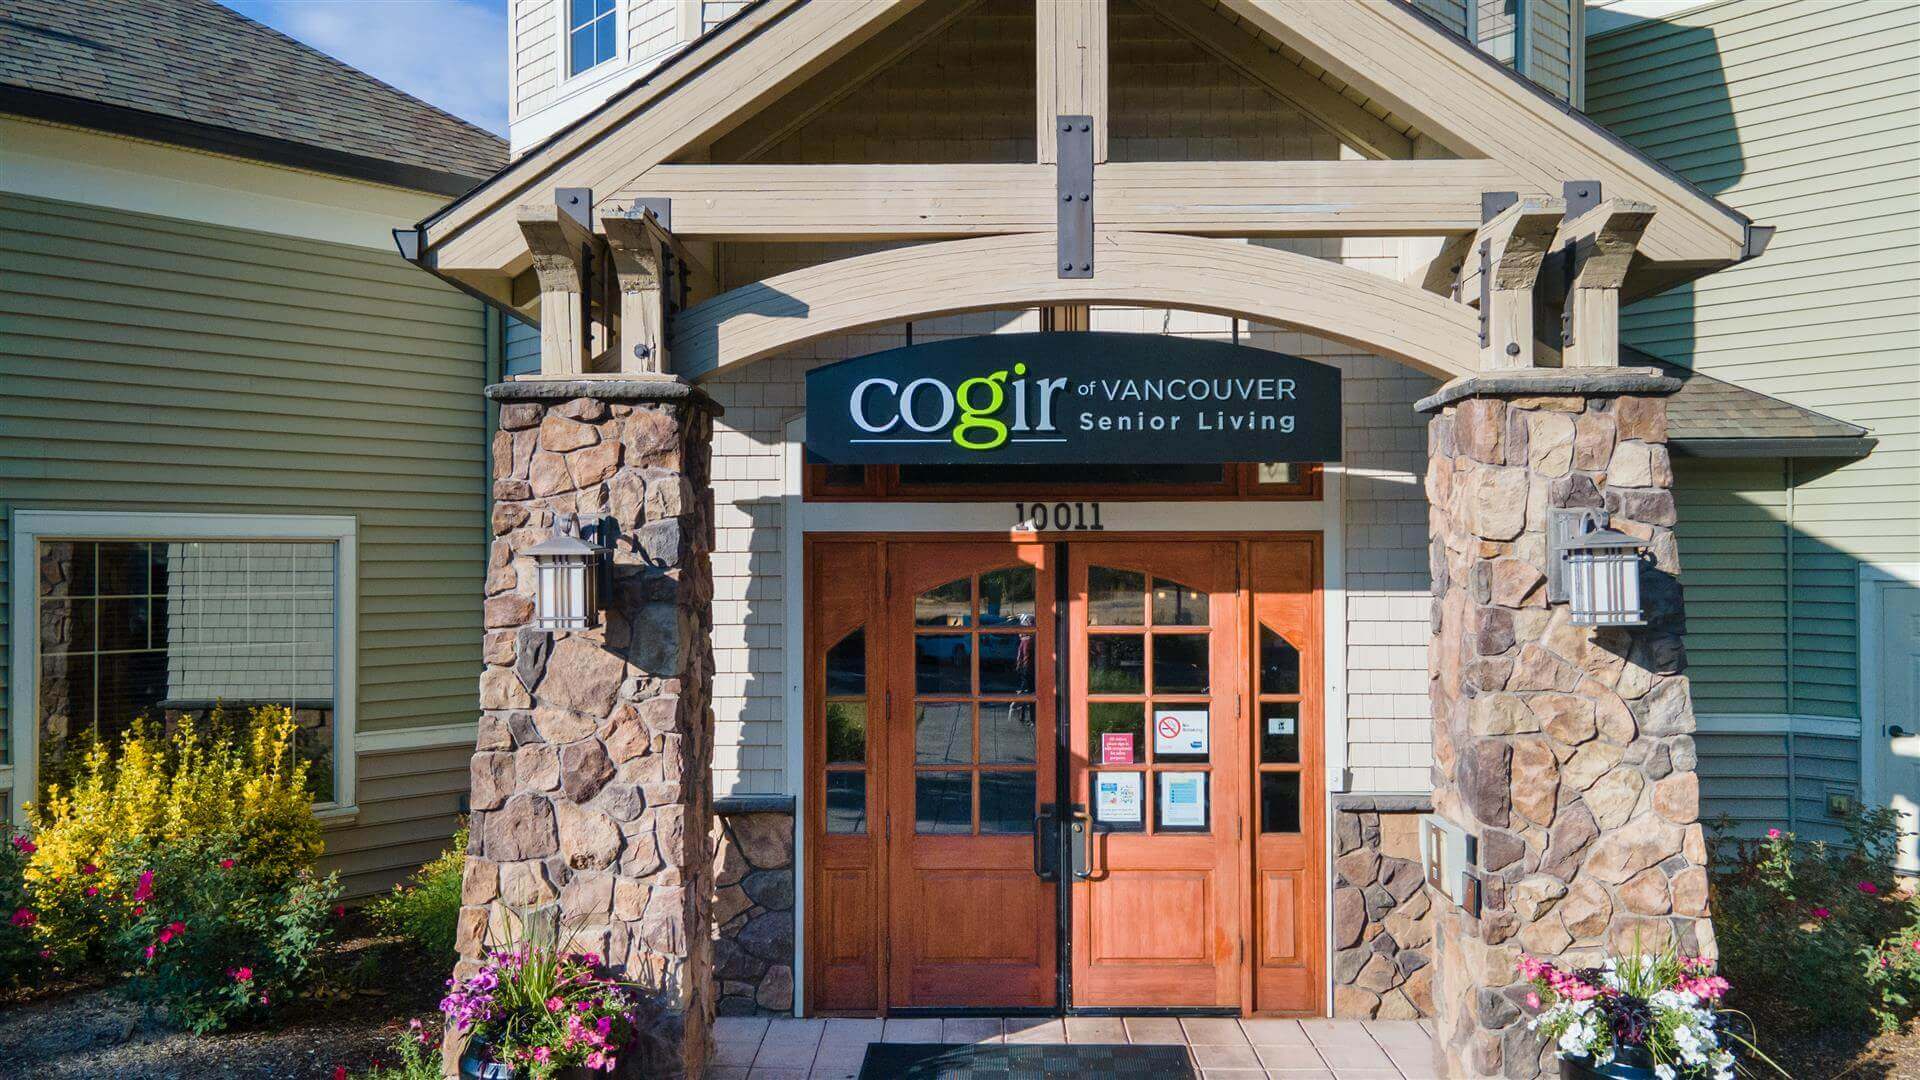 Entrance at Cogir of Vancouver, Vancouver, WA